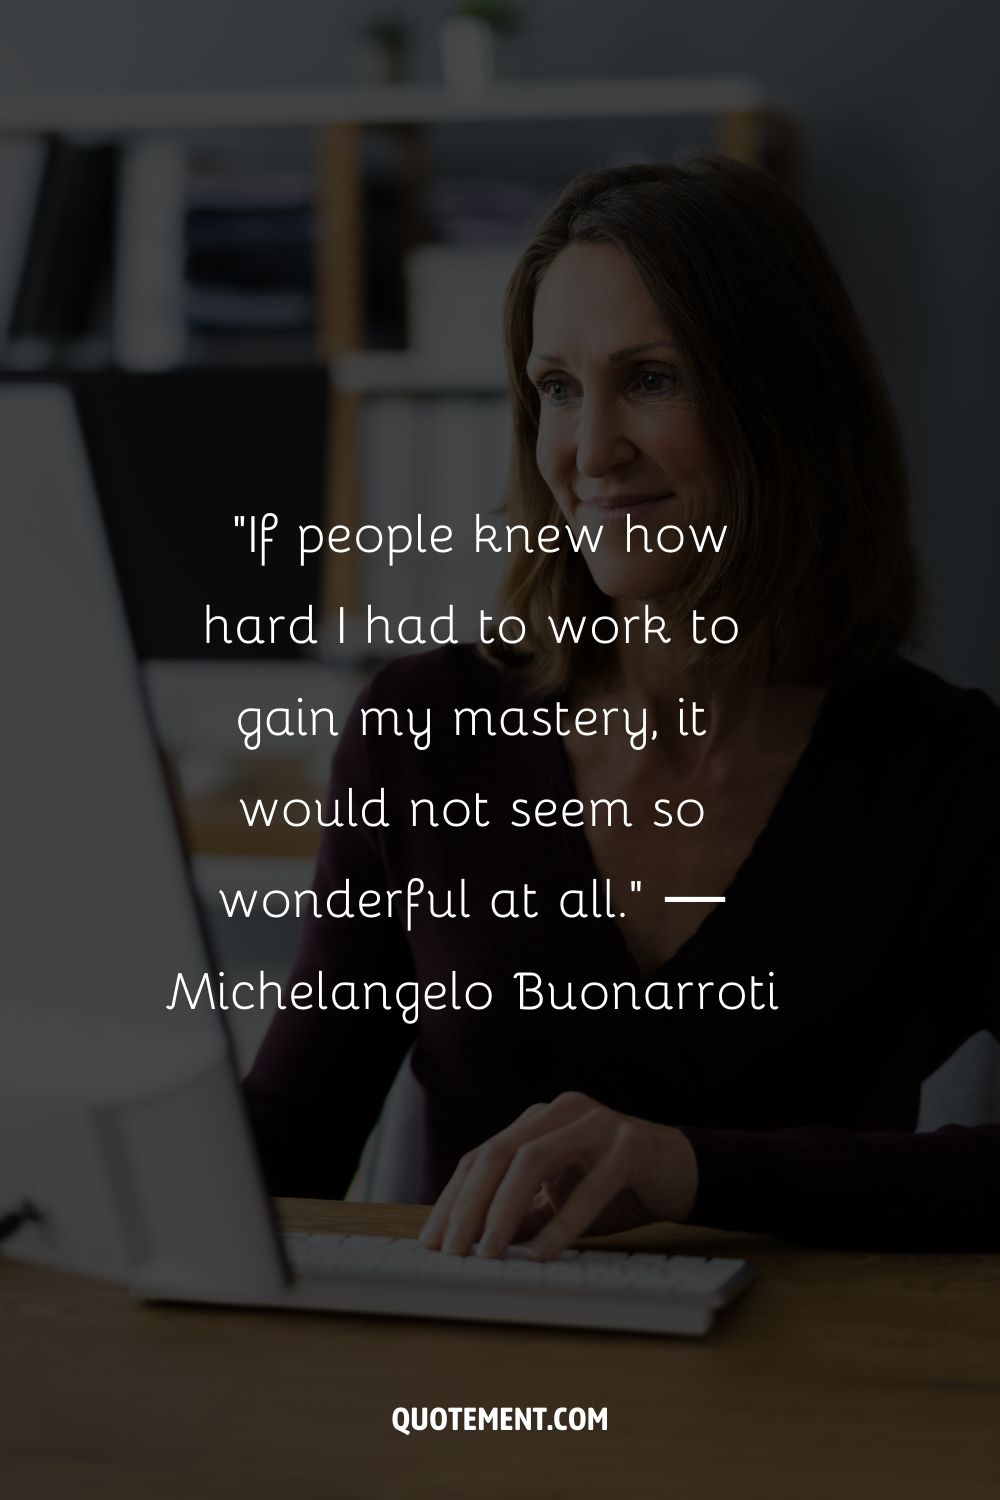 “If people knew how hard I had to work to gain my mastery, it would not seem so wonderful at all.” ― Michelangelo Buonarroti